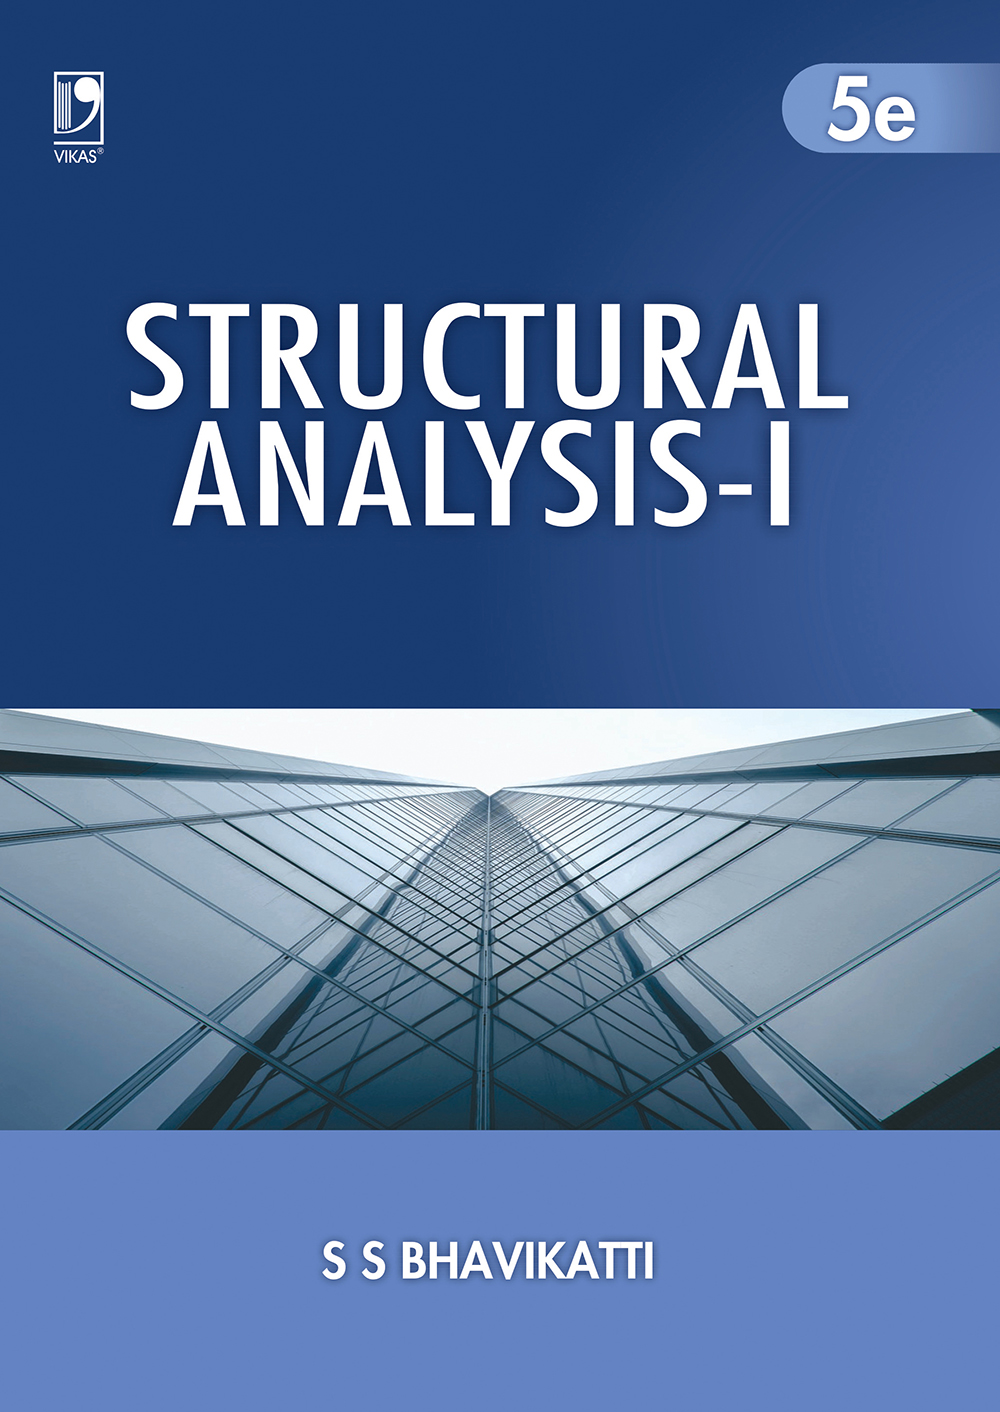 structural analysis and design thesis